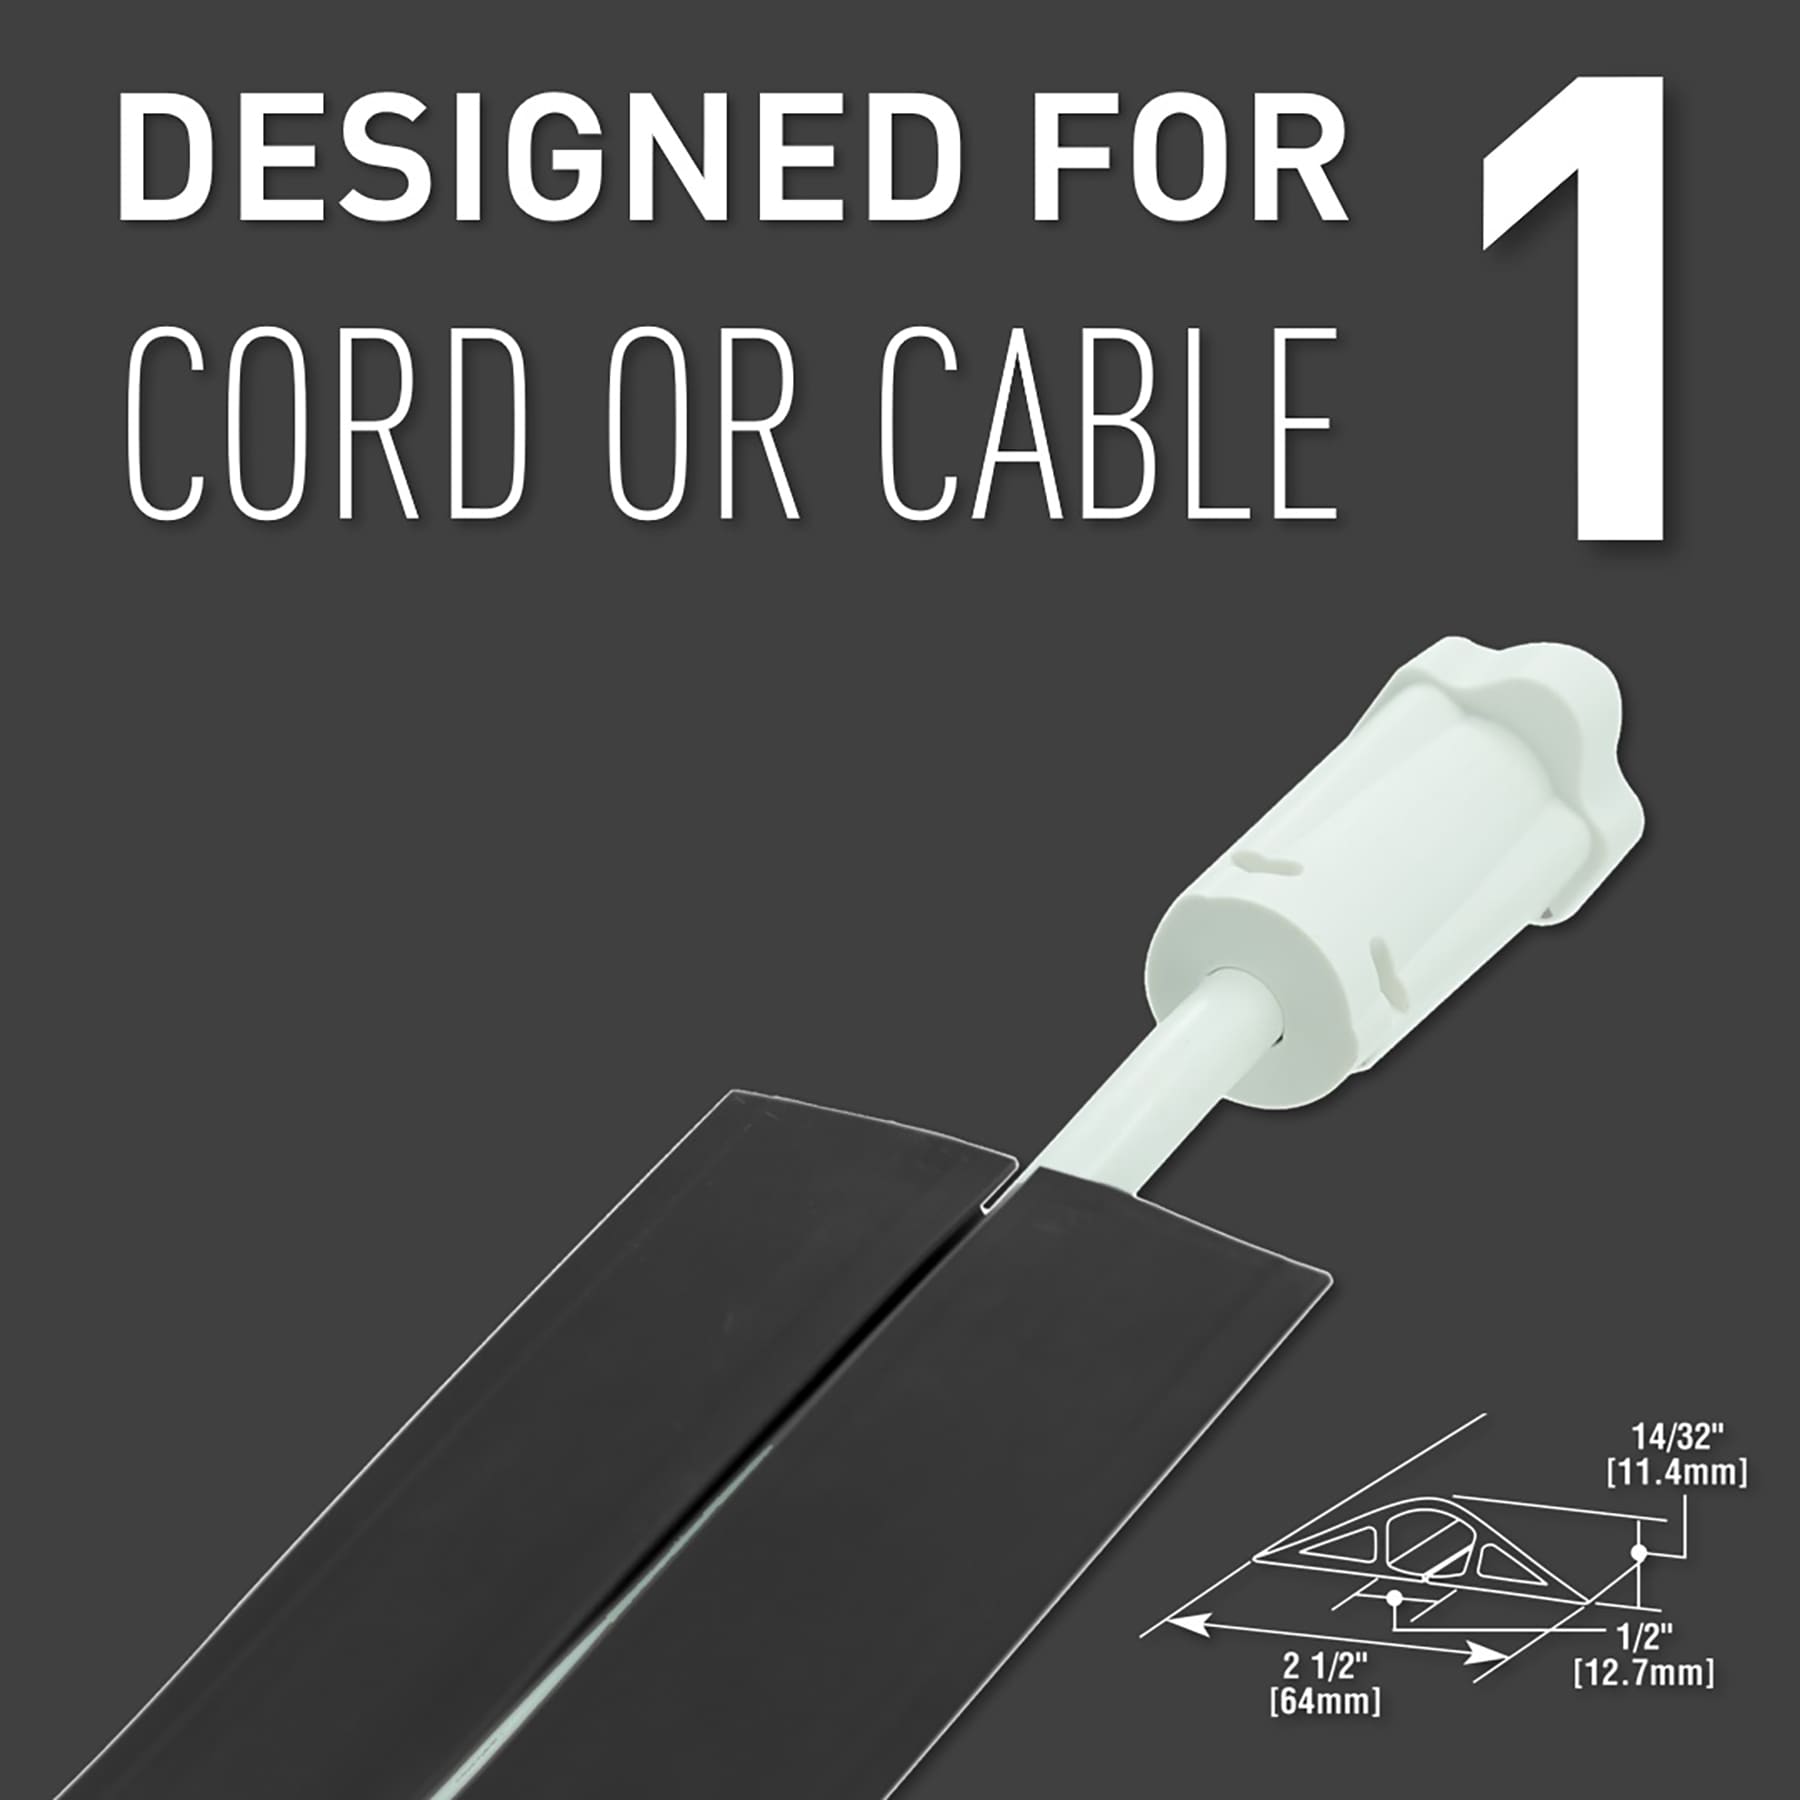 Commercial Electric 5 ft. Fabric Floor Cord Protector in Black A92